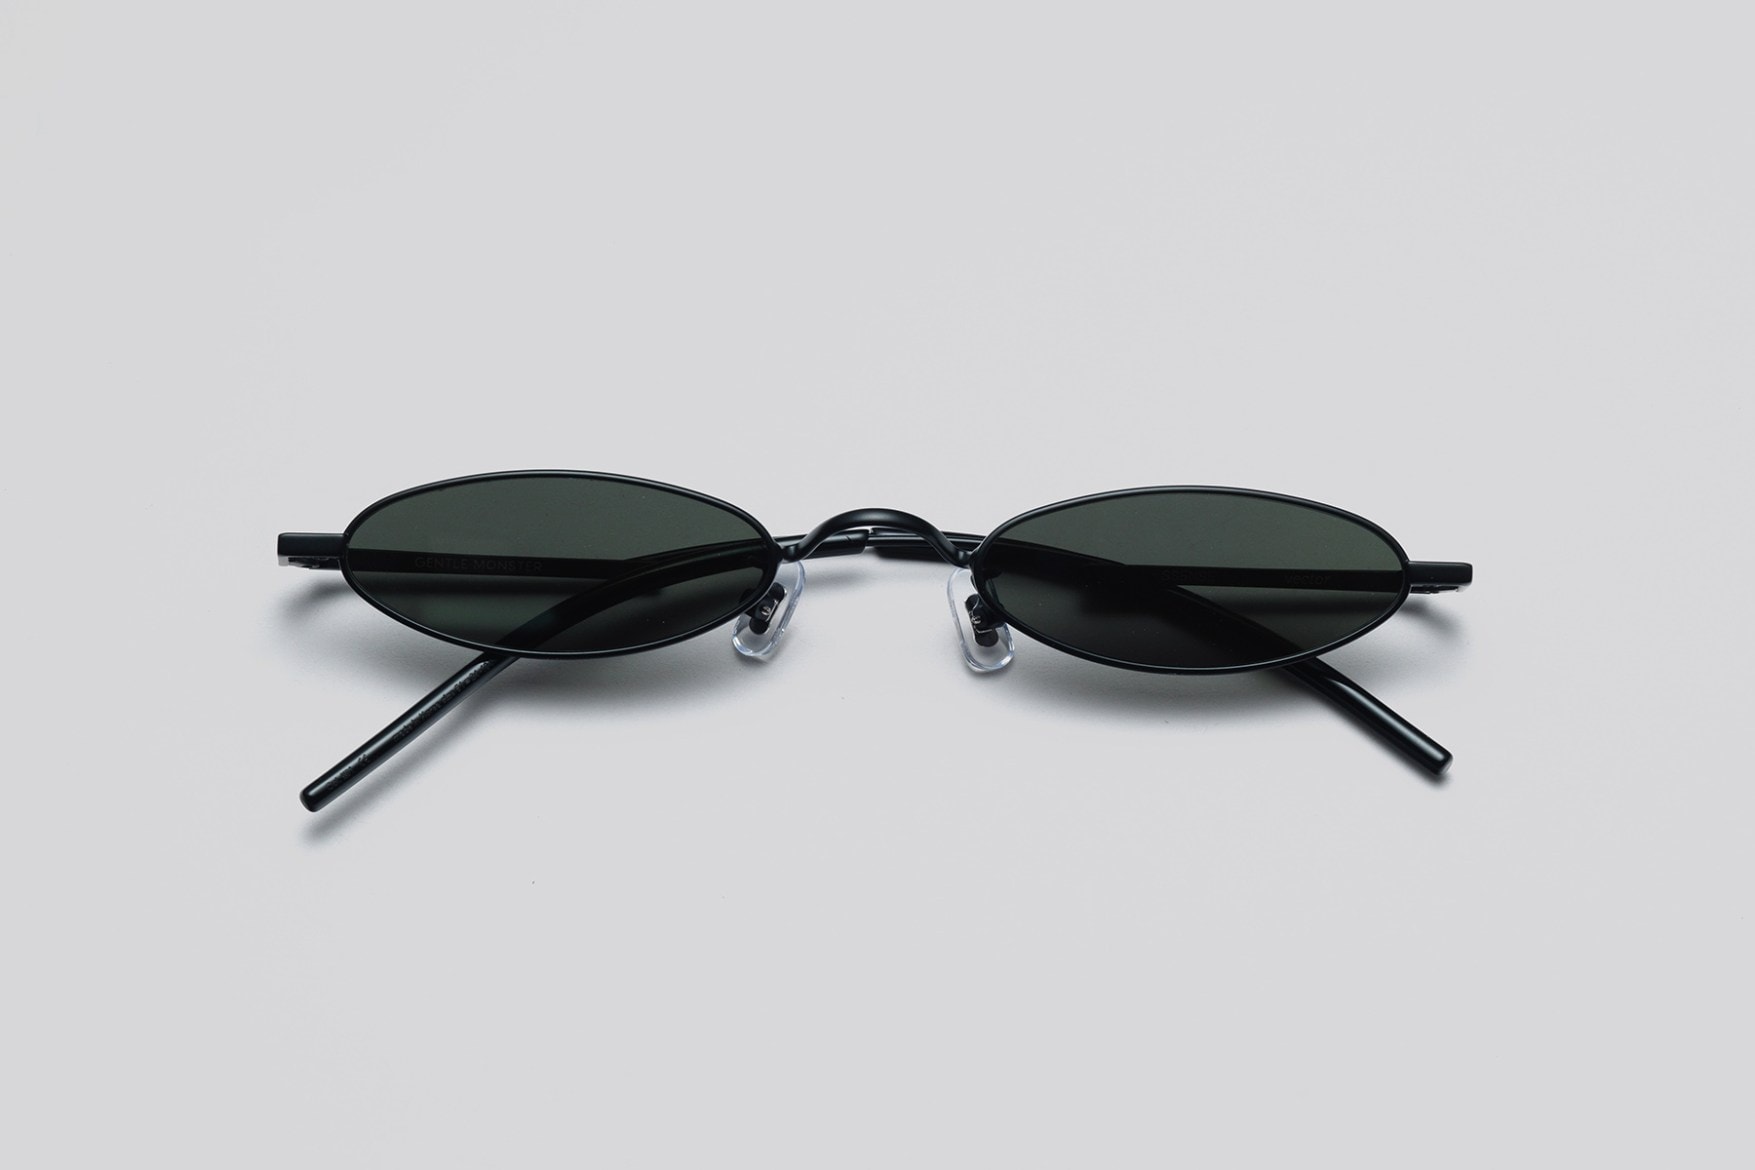 SSENSE x Gentle Monster Exclusive Sunglasses Shades Accessories Small Metal Frames Trend